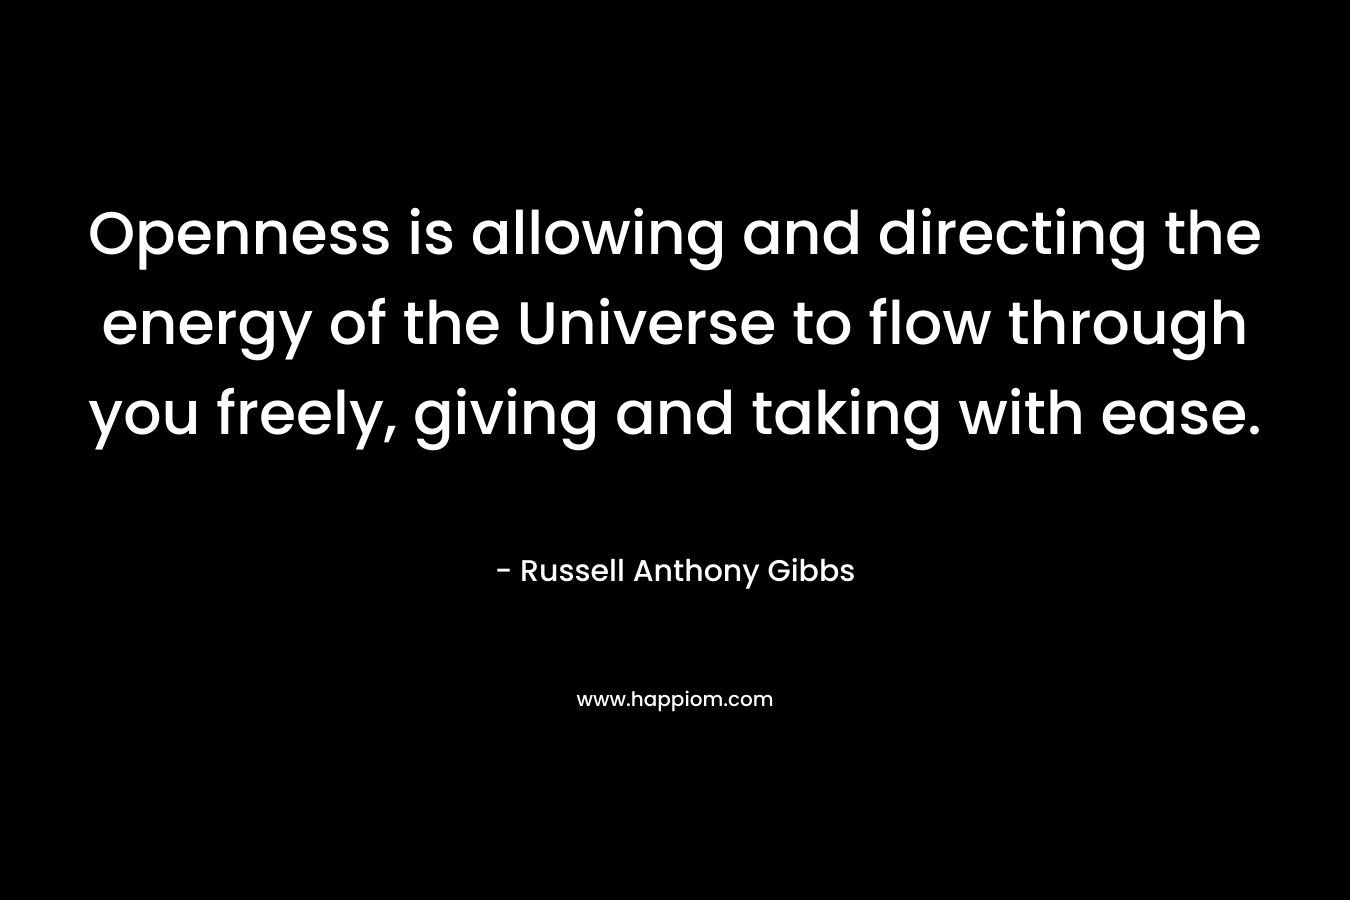 Openness is allowing and directing the energy of the Universe to flow through you freely, giving and taking with ease. – Russell Anthony Gibbs